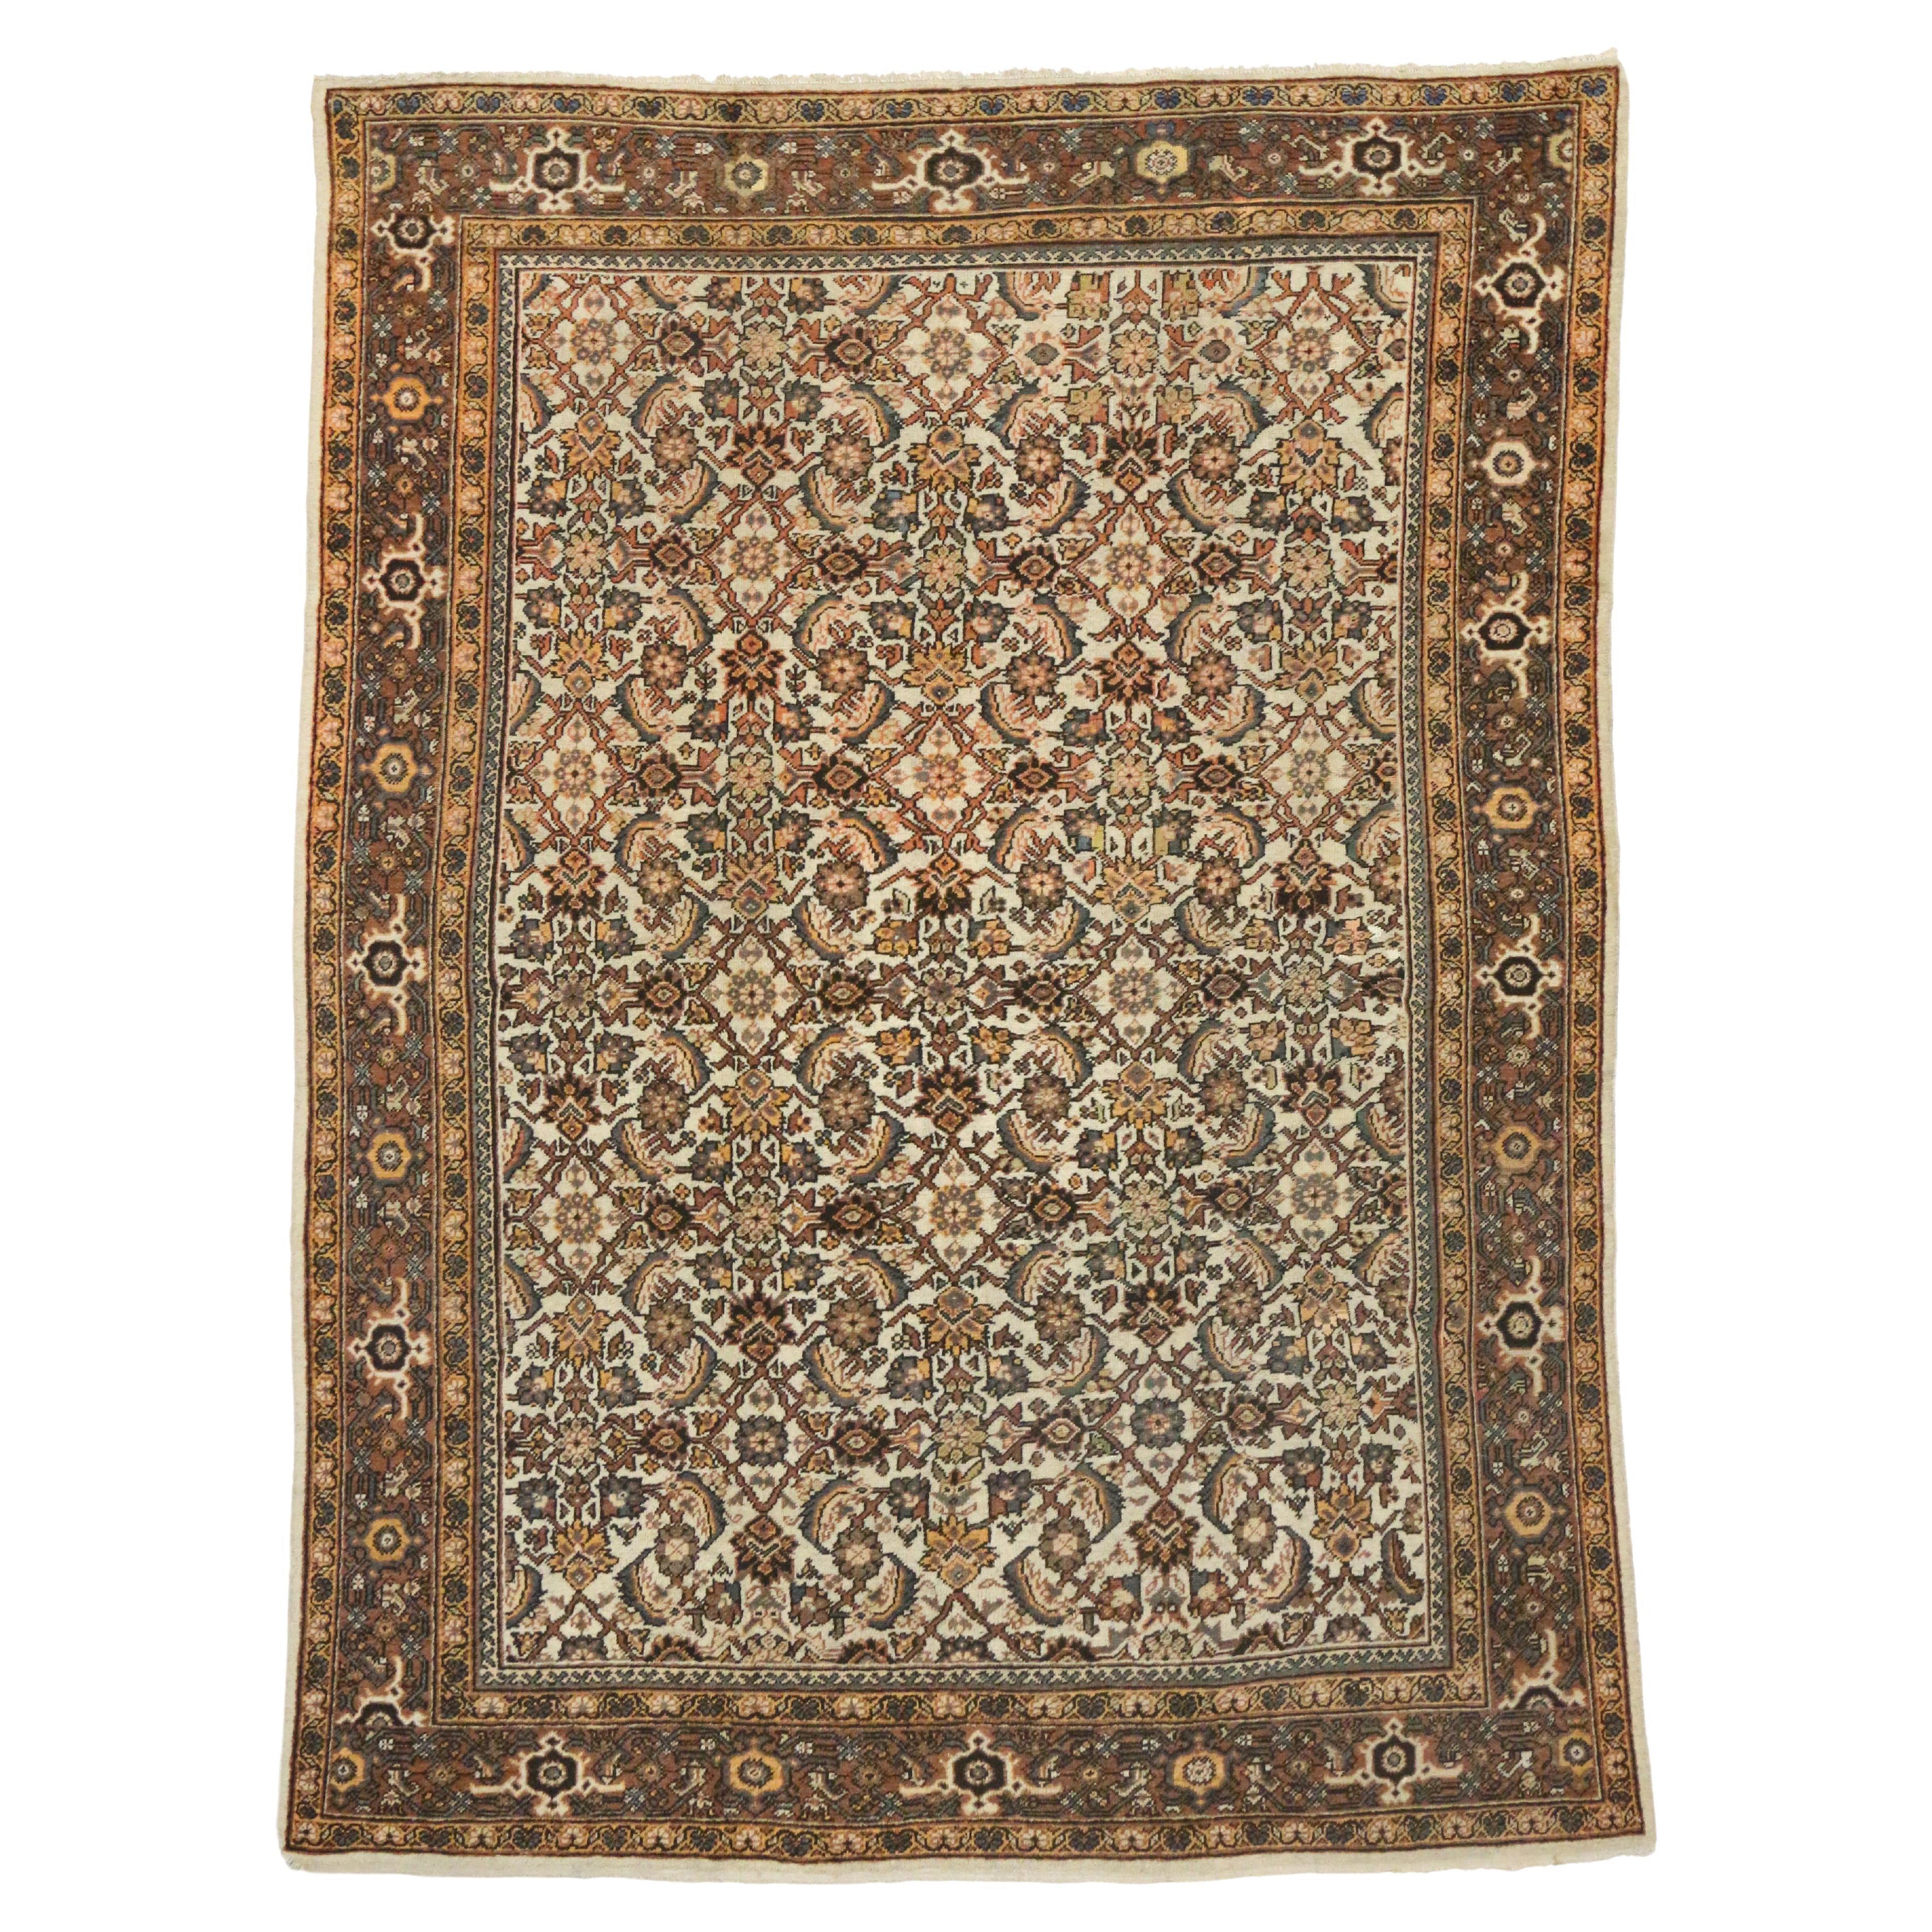 Antique Persian Mahal Rug with Herati Pattern and Rustic Arts & Crafts Style For Sale